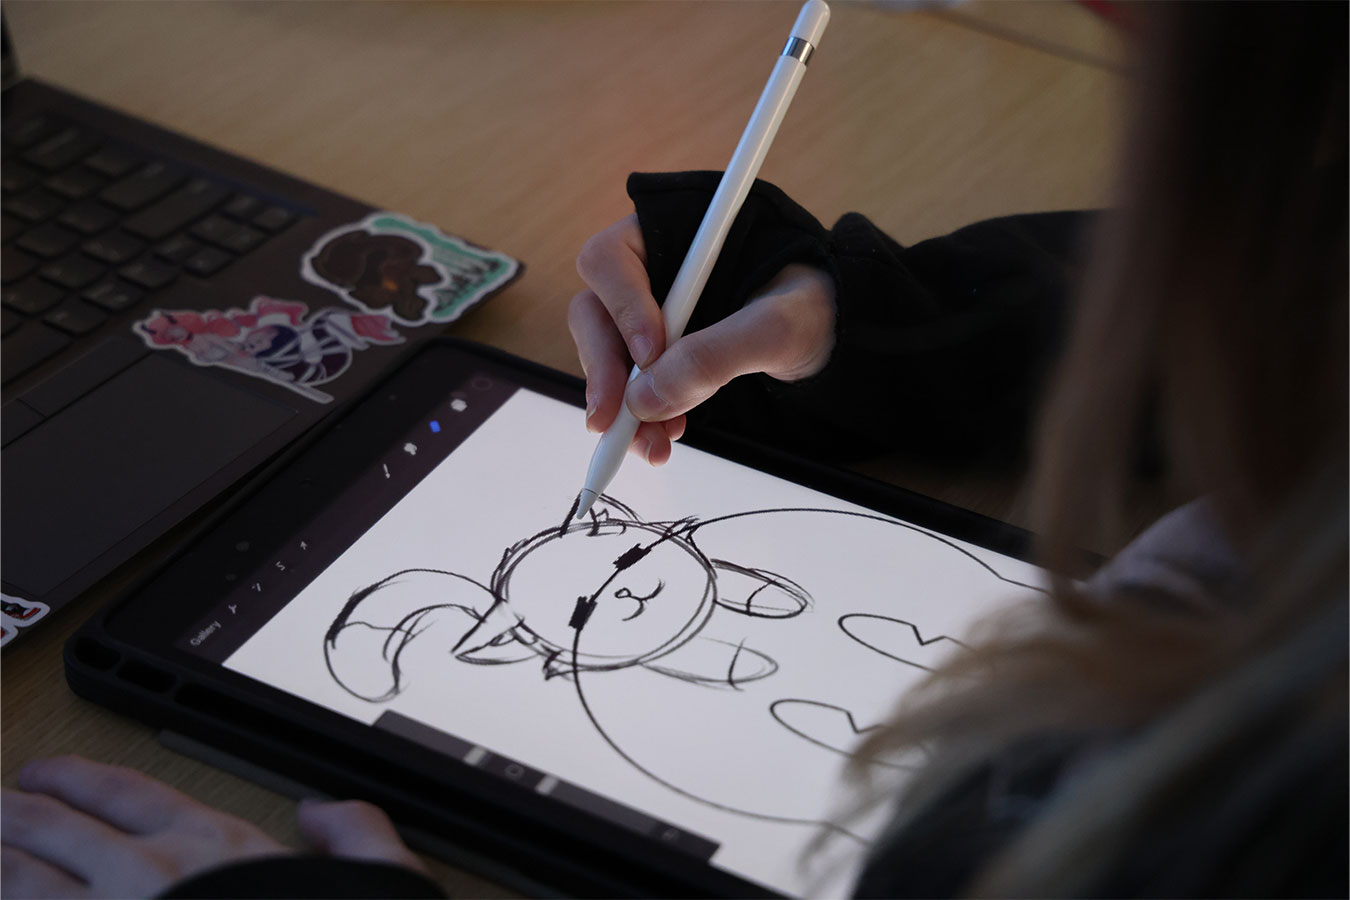 Game design student drawing a cat on a tablet.